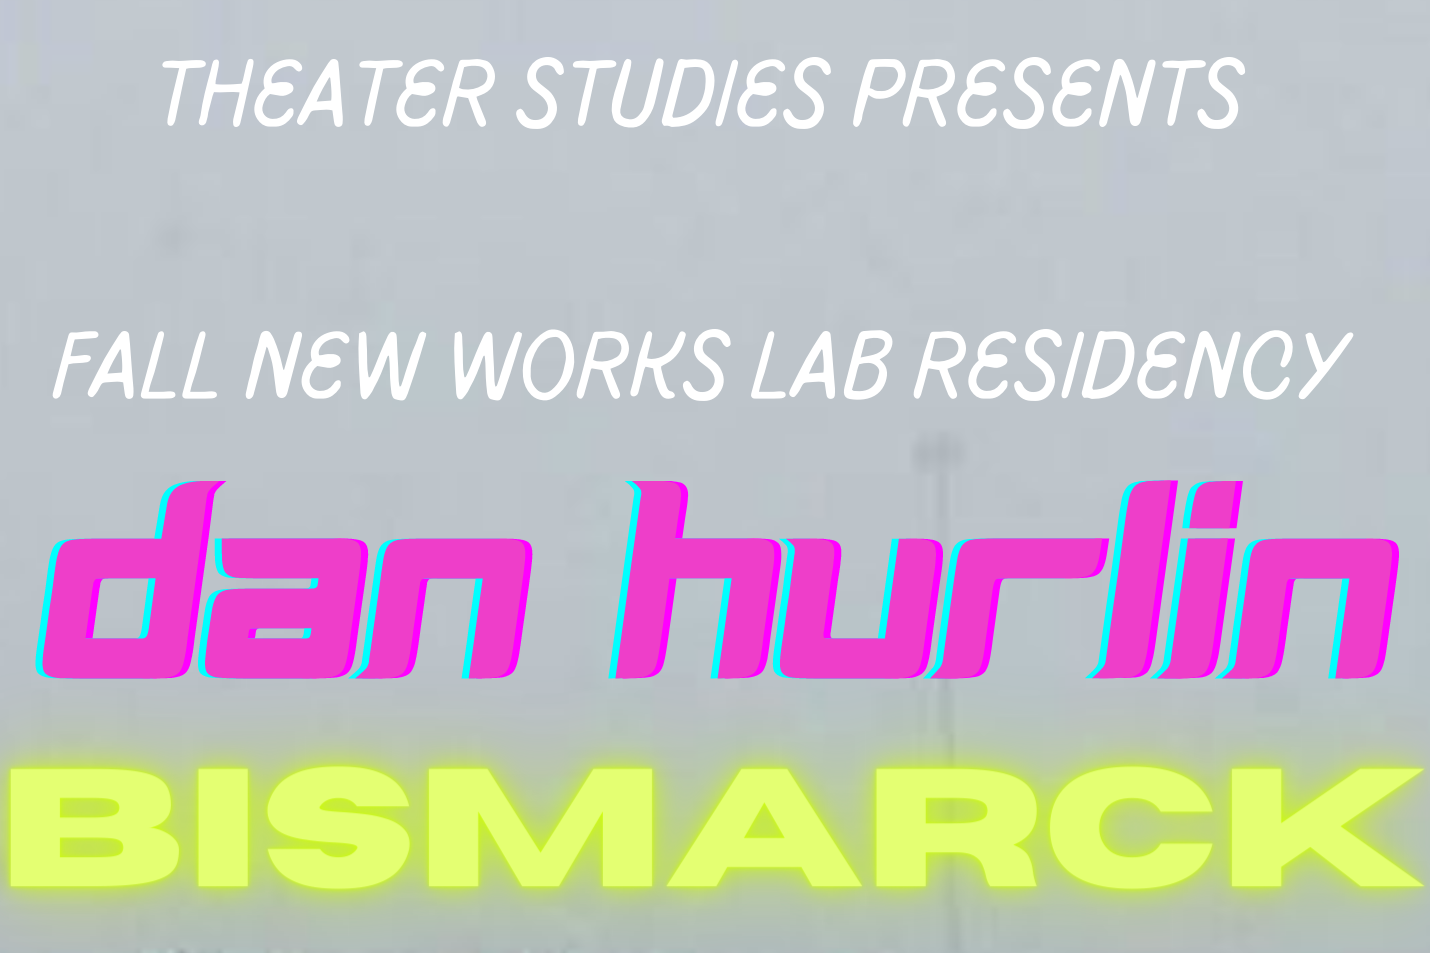 Image of a snowy highway underpass with text superimposed over image, reading &quot;Theater Studies Presents New Works Lab Residency Dan Hurlin BISMARCK Presentation of Work Friday September 16 5 p.m. Sheafer Lab Theater Doors open 4:45 p.m.